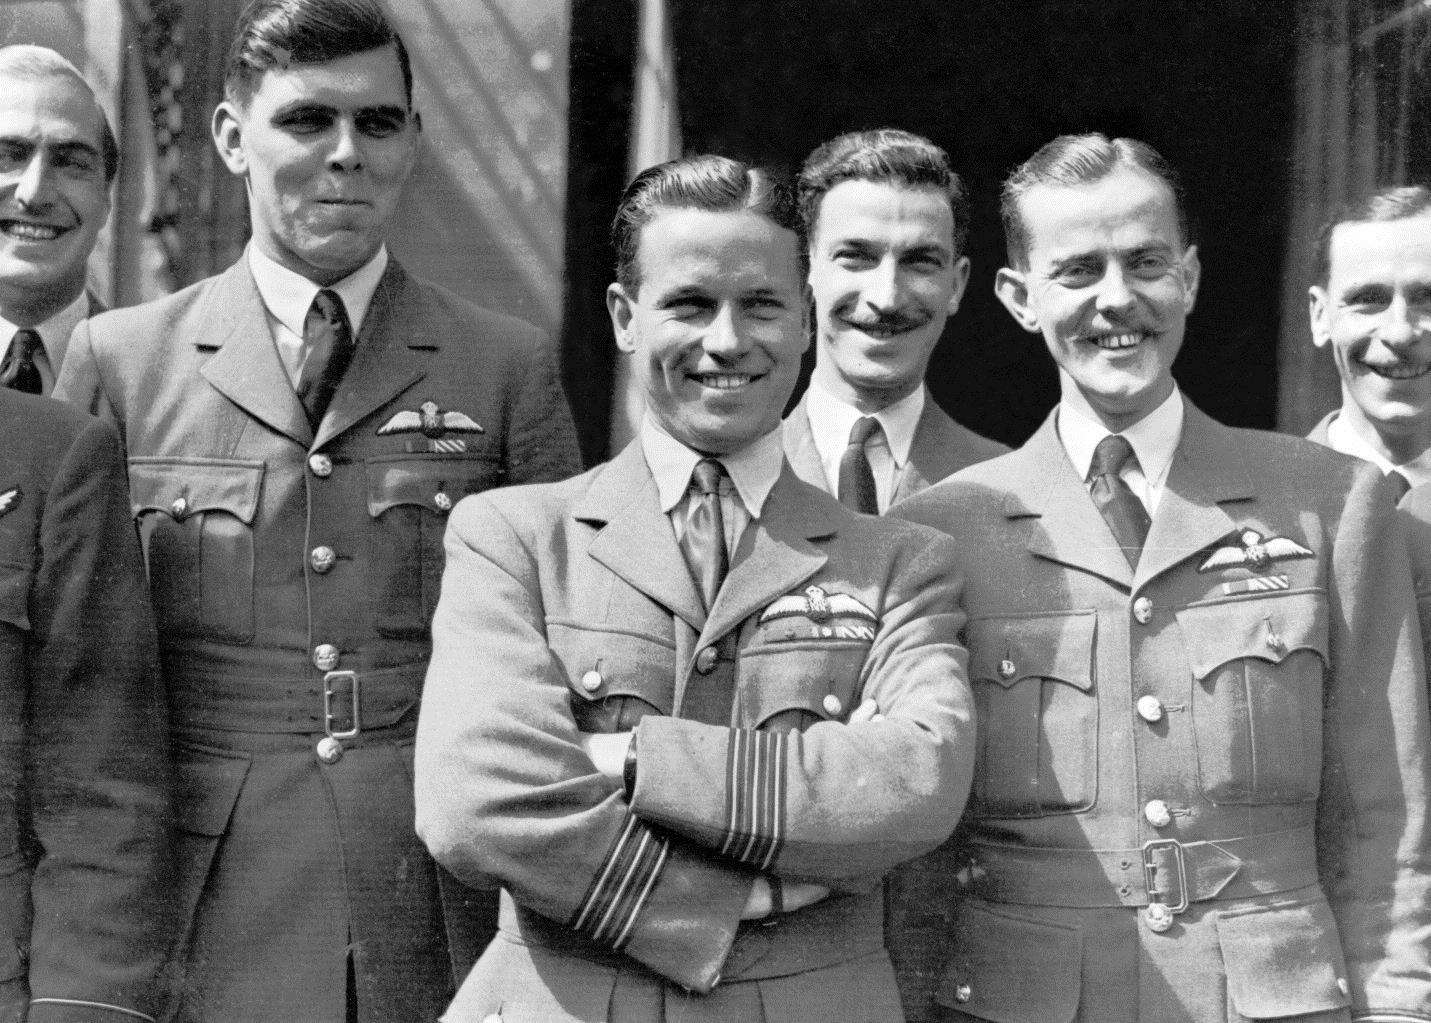 Guy Gibson (centre) and others of 617 Squadron